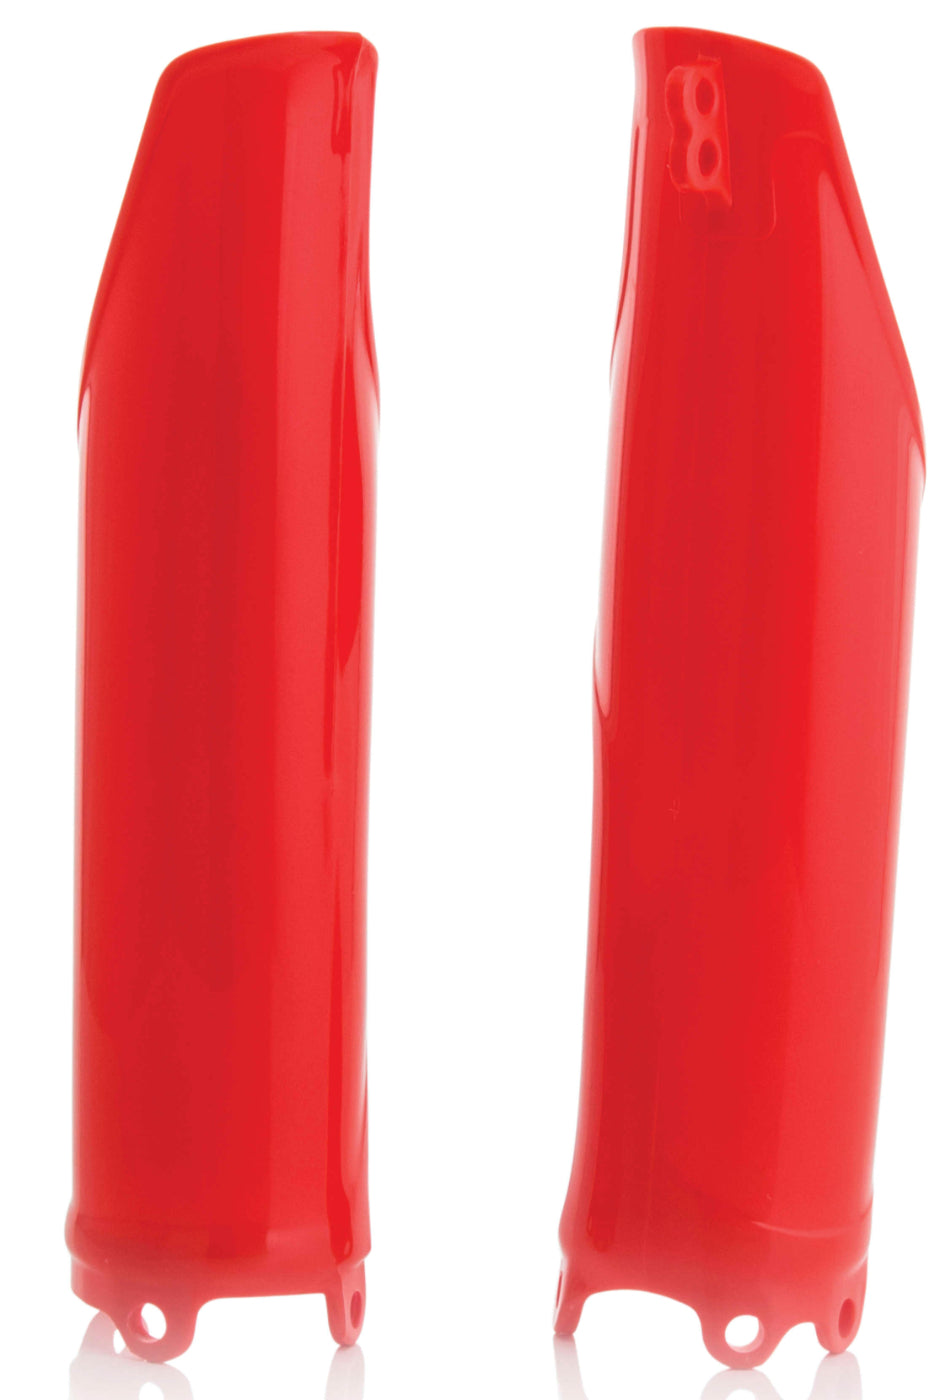 Acerbis Red Fork Covers for Honda - 2640300227